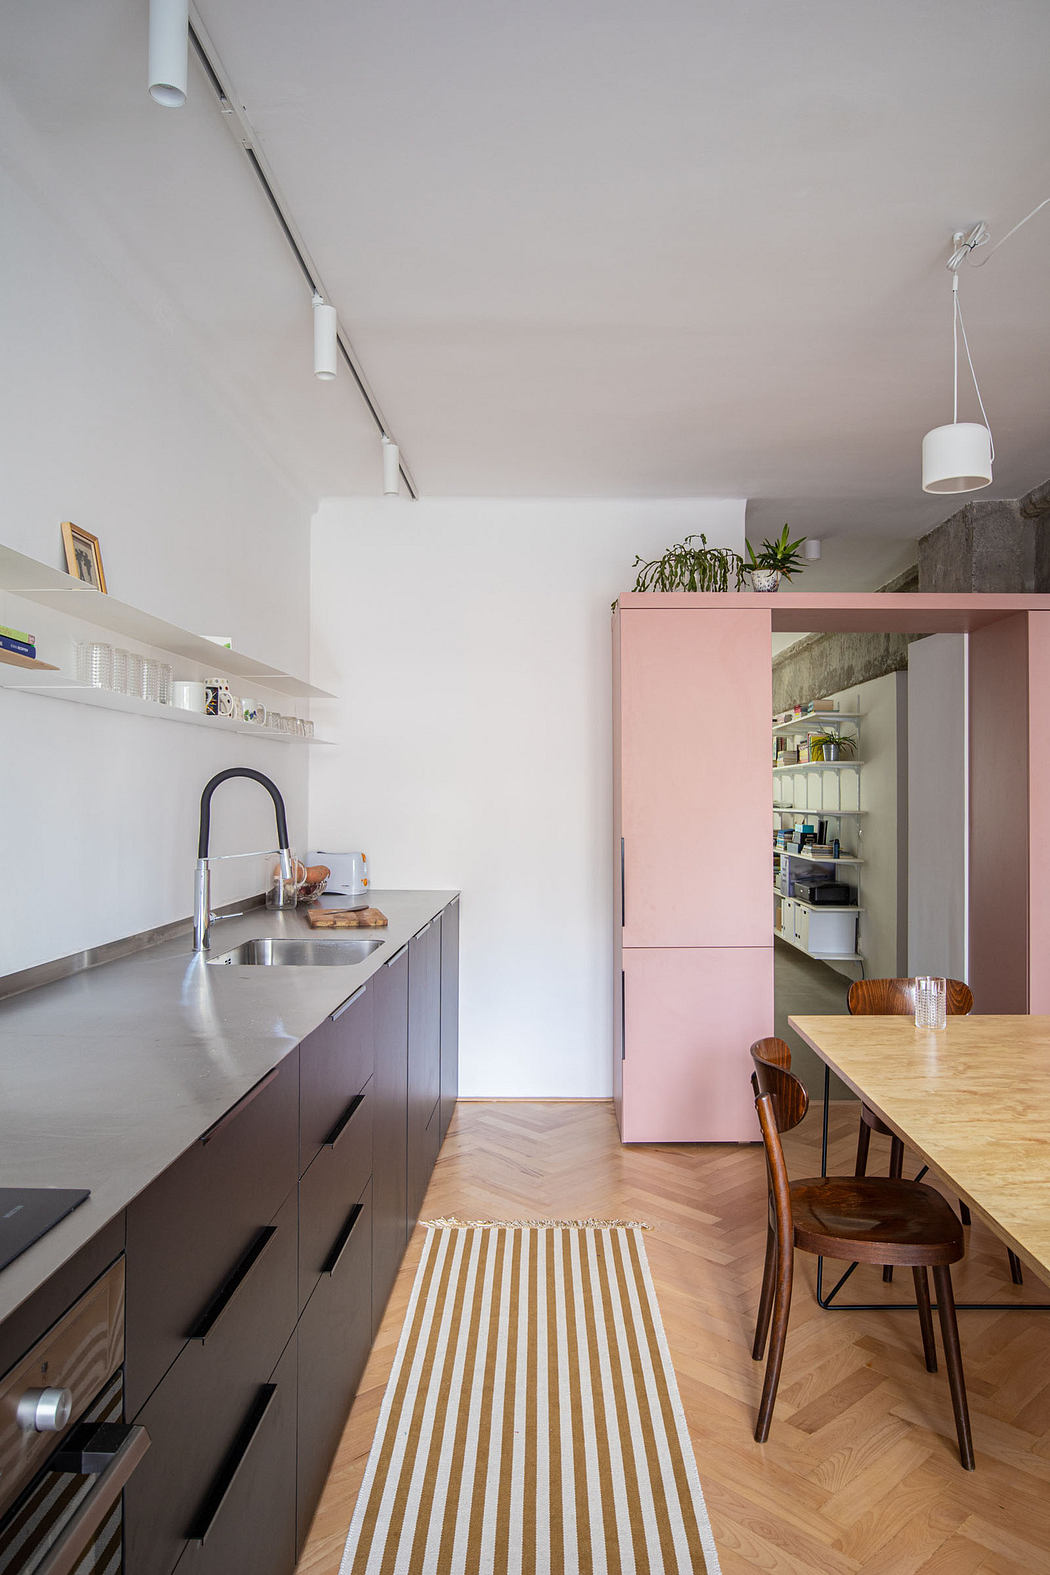 Modern kitchen interior with pink cabinets and wooden dining area.